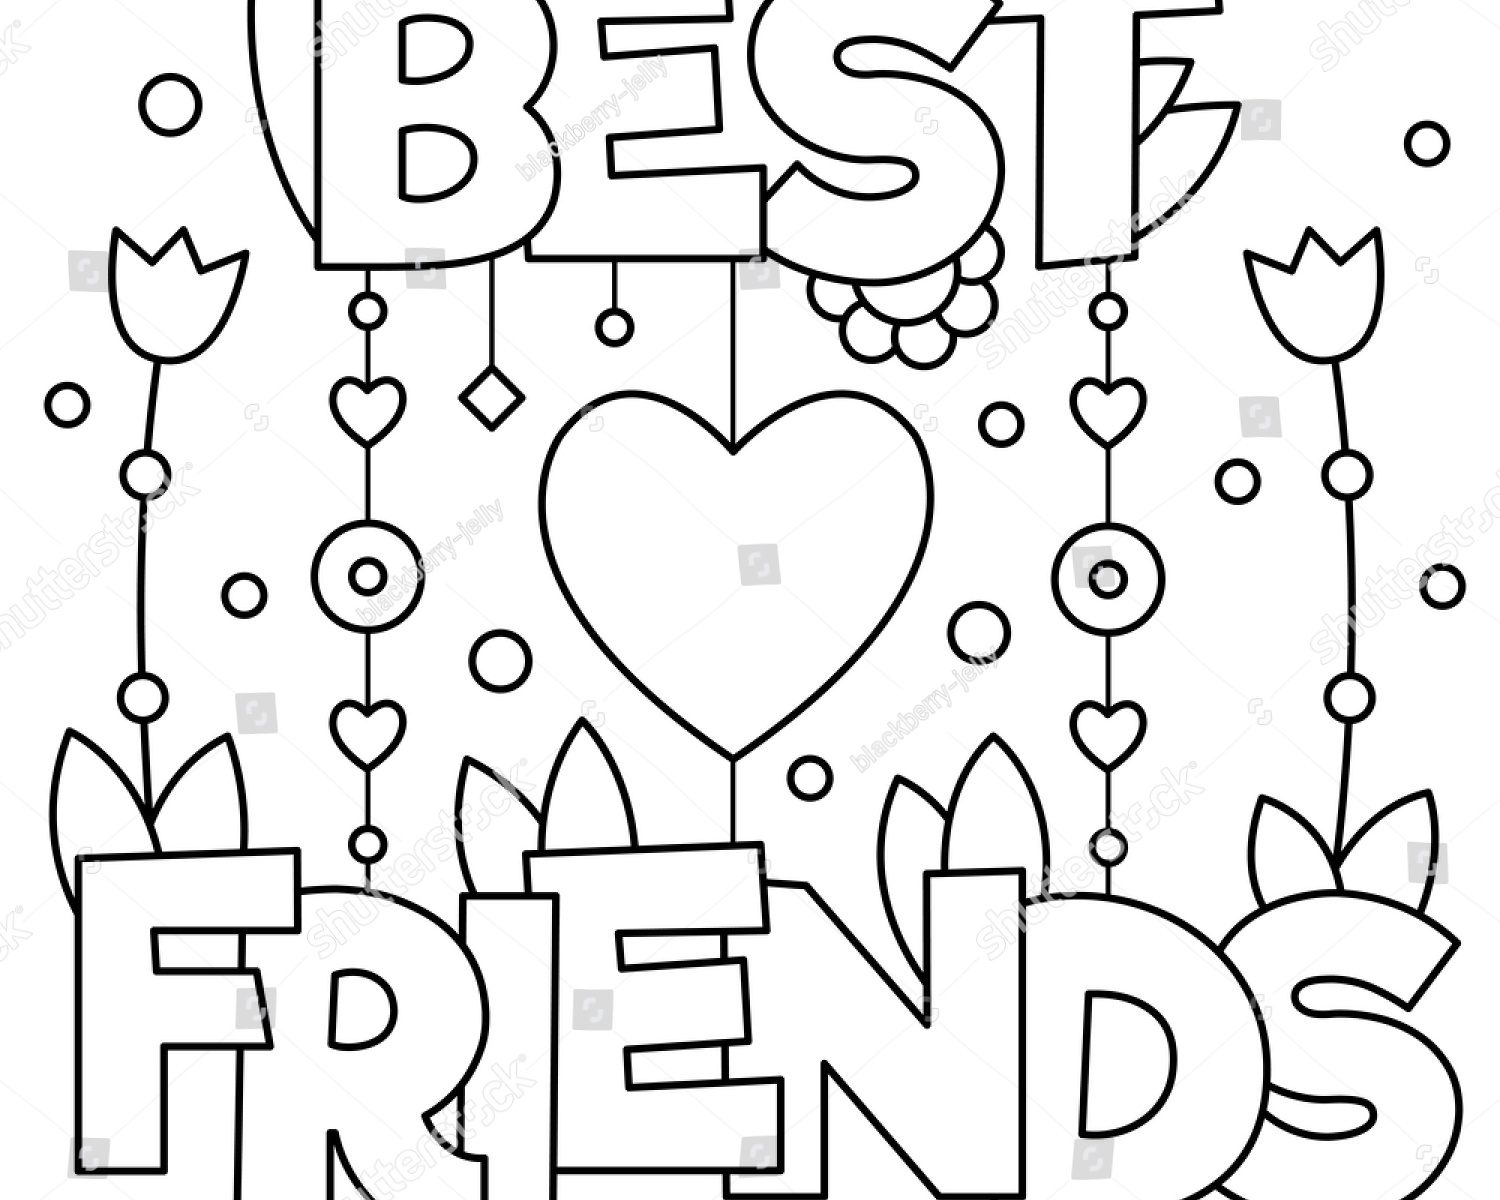 Best Friend Coloring Pages For Girls at Free